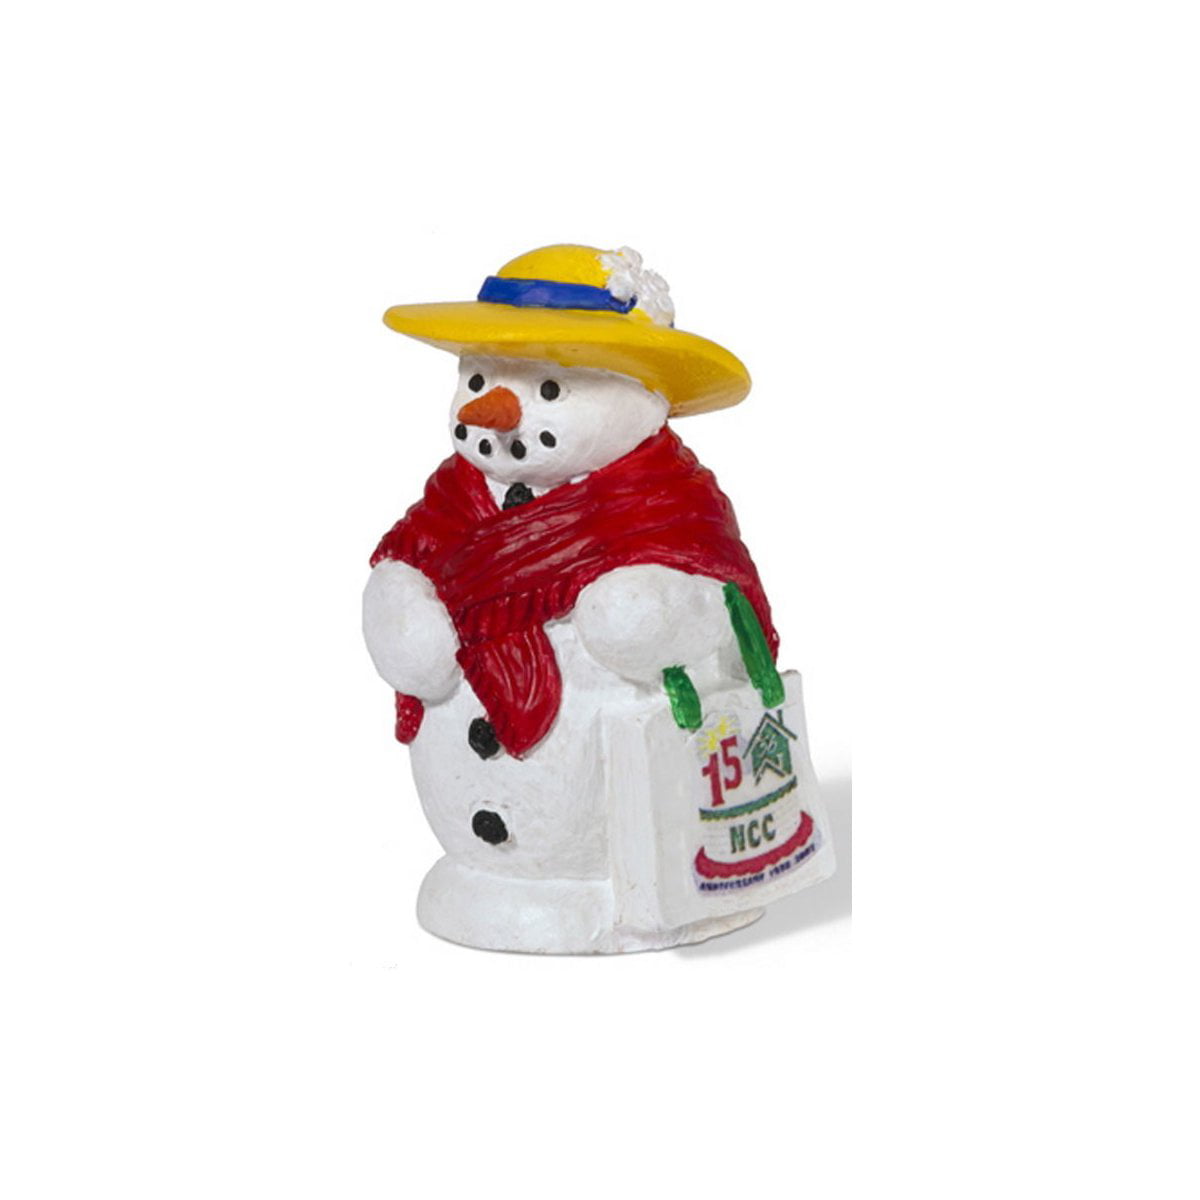 Plastic Acrylic Snow Glittered Snowman Head Ornament by Department 56 